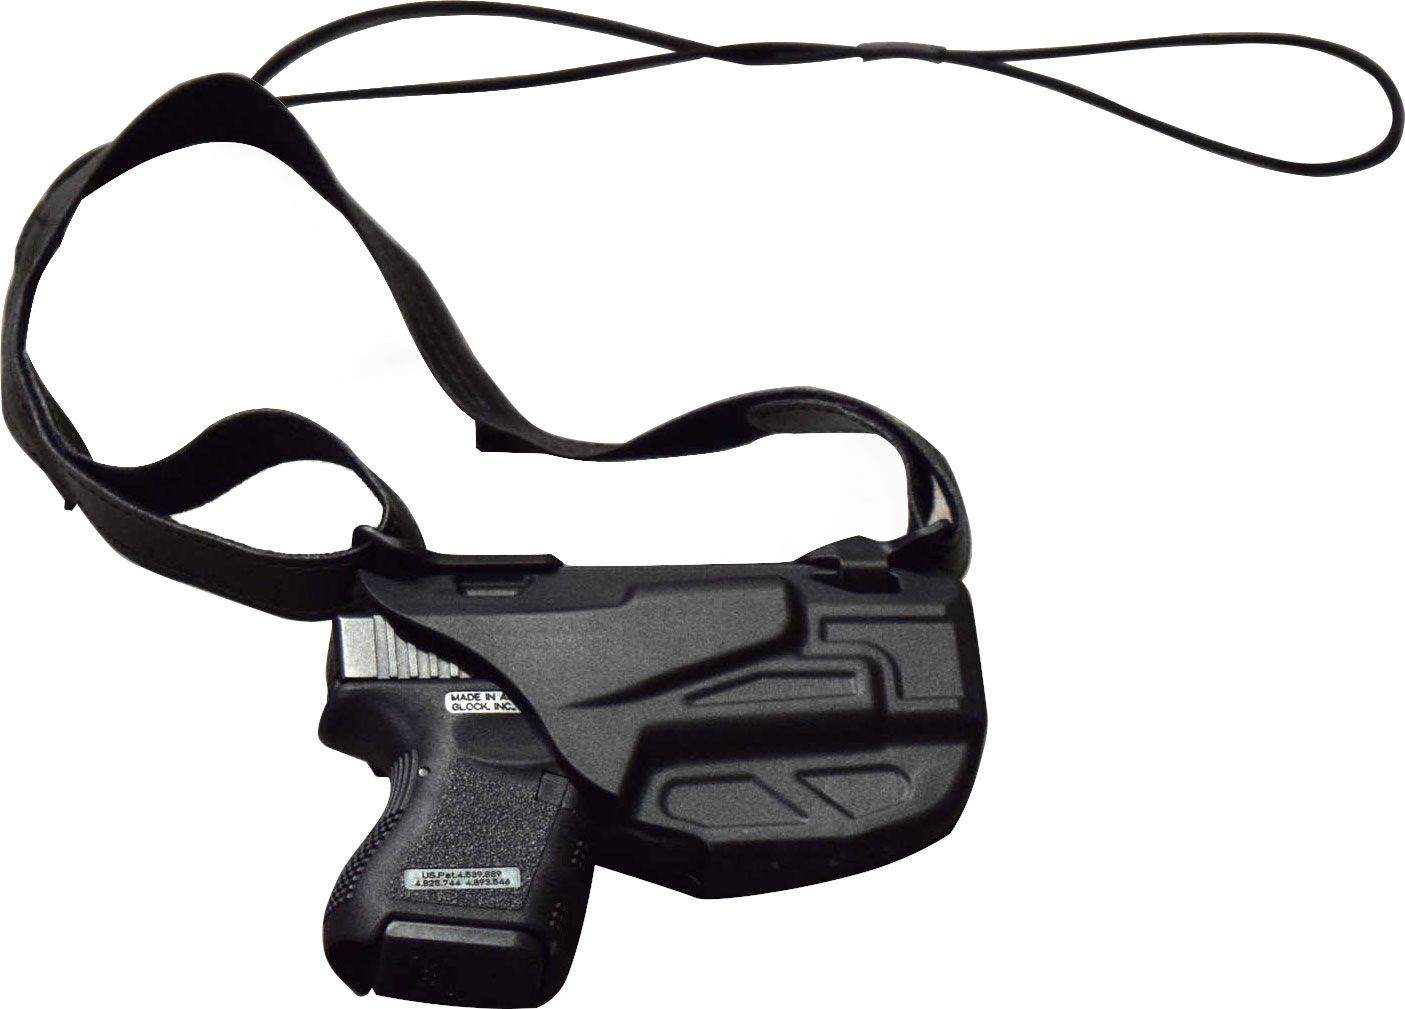 Safariland Ts Als Shoulder Holster Up To Off Star Rating W